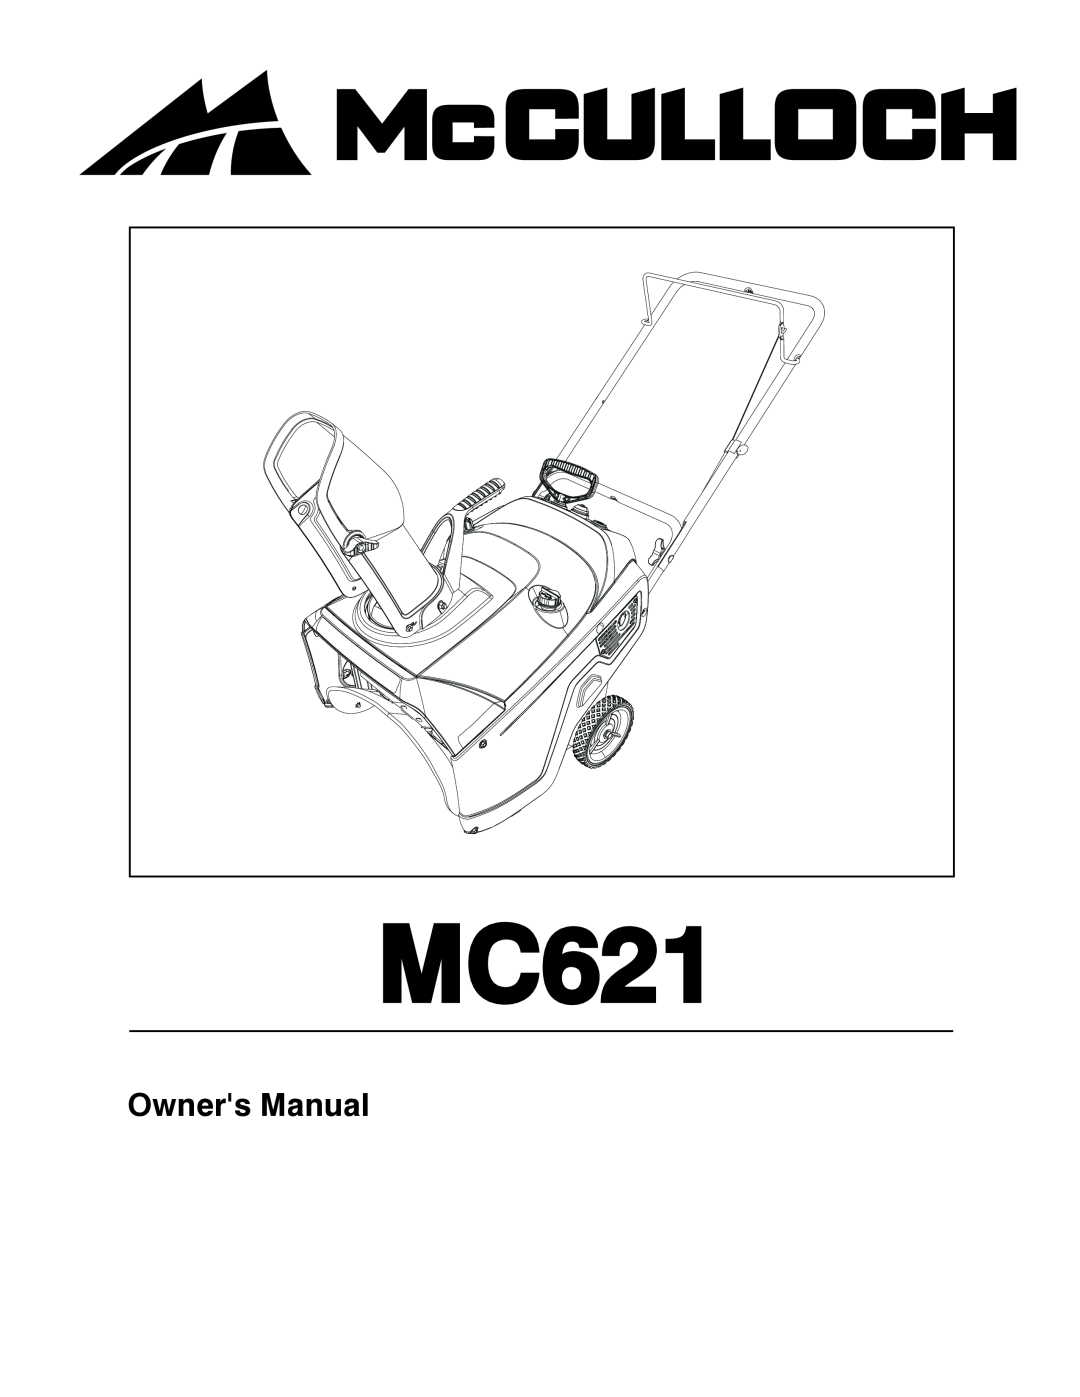 McCulloch 96182000500 owner manual Owners Manual, MC621 